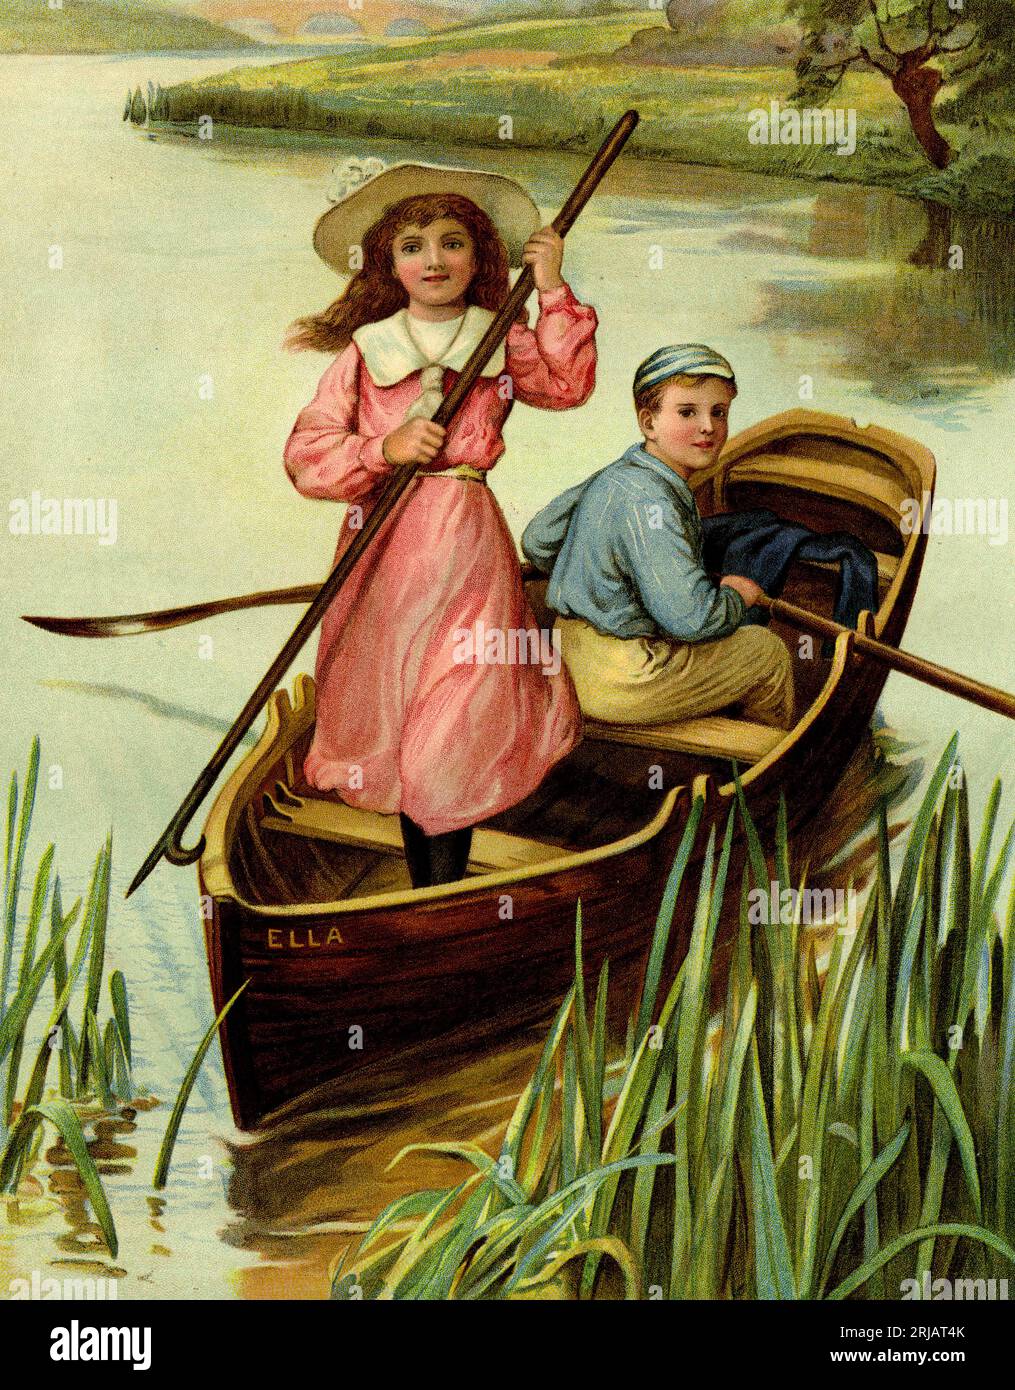 Charming chromolithograph of a boy and a girl exploring a stream in a rowboat, circa 1910 Stock Photo